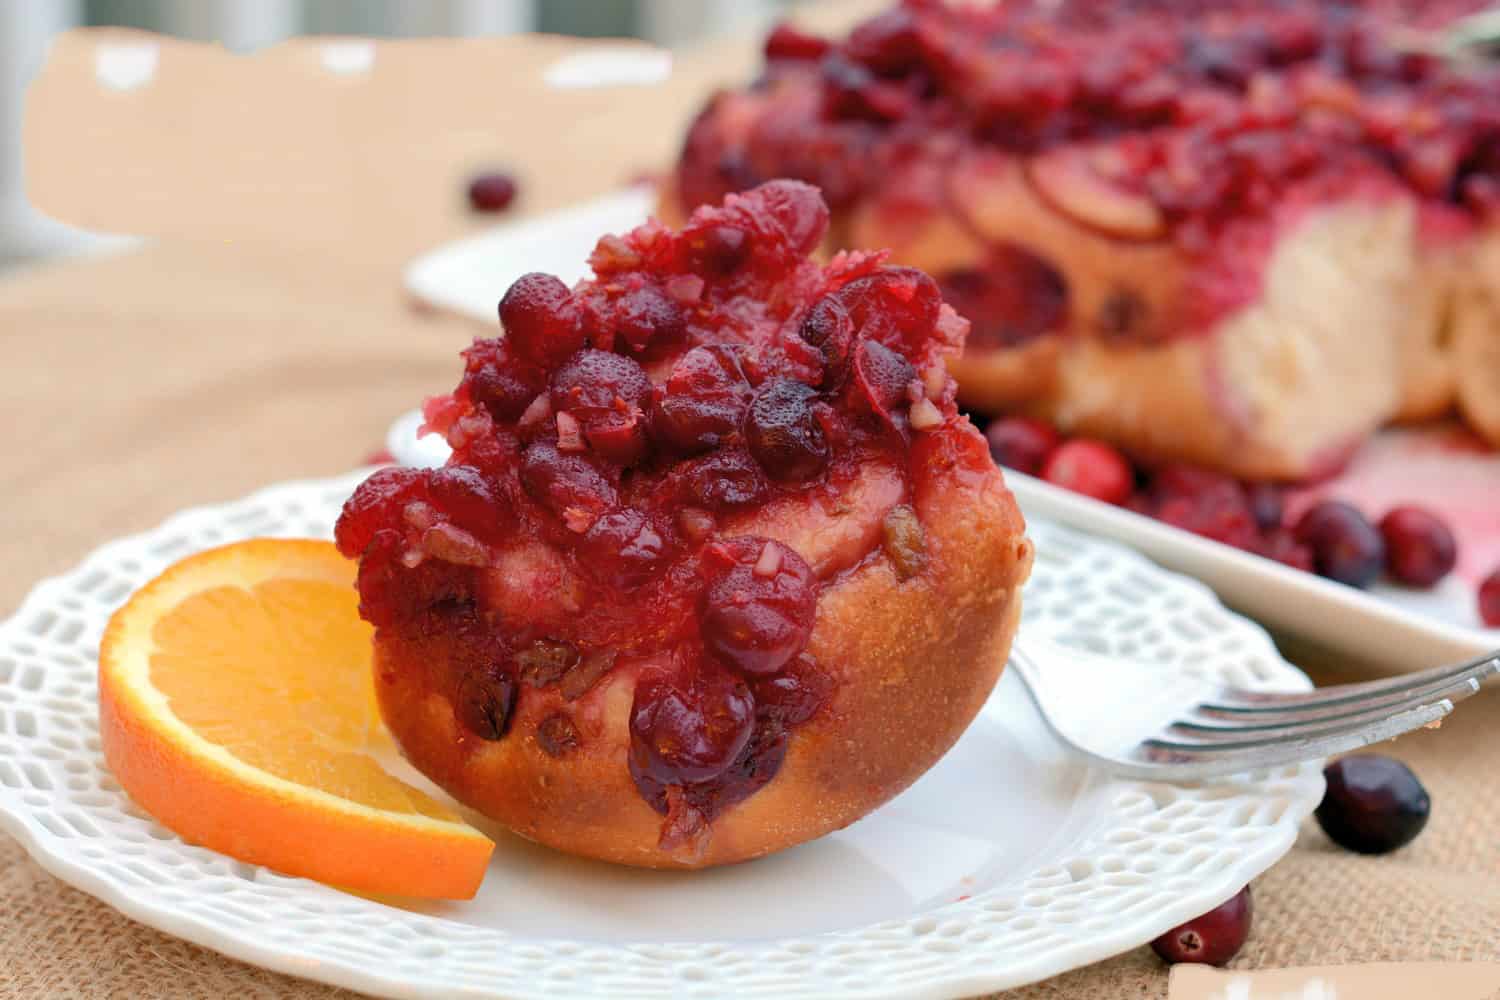 Cranberry sweet rolls are perfect for any holiday breakfast or even dessert. Orange cranberry bread in sweet roll form is an award winning recipe! #cranberrysweetrolls www.savoryexperiments.com 